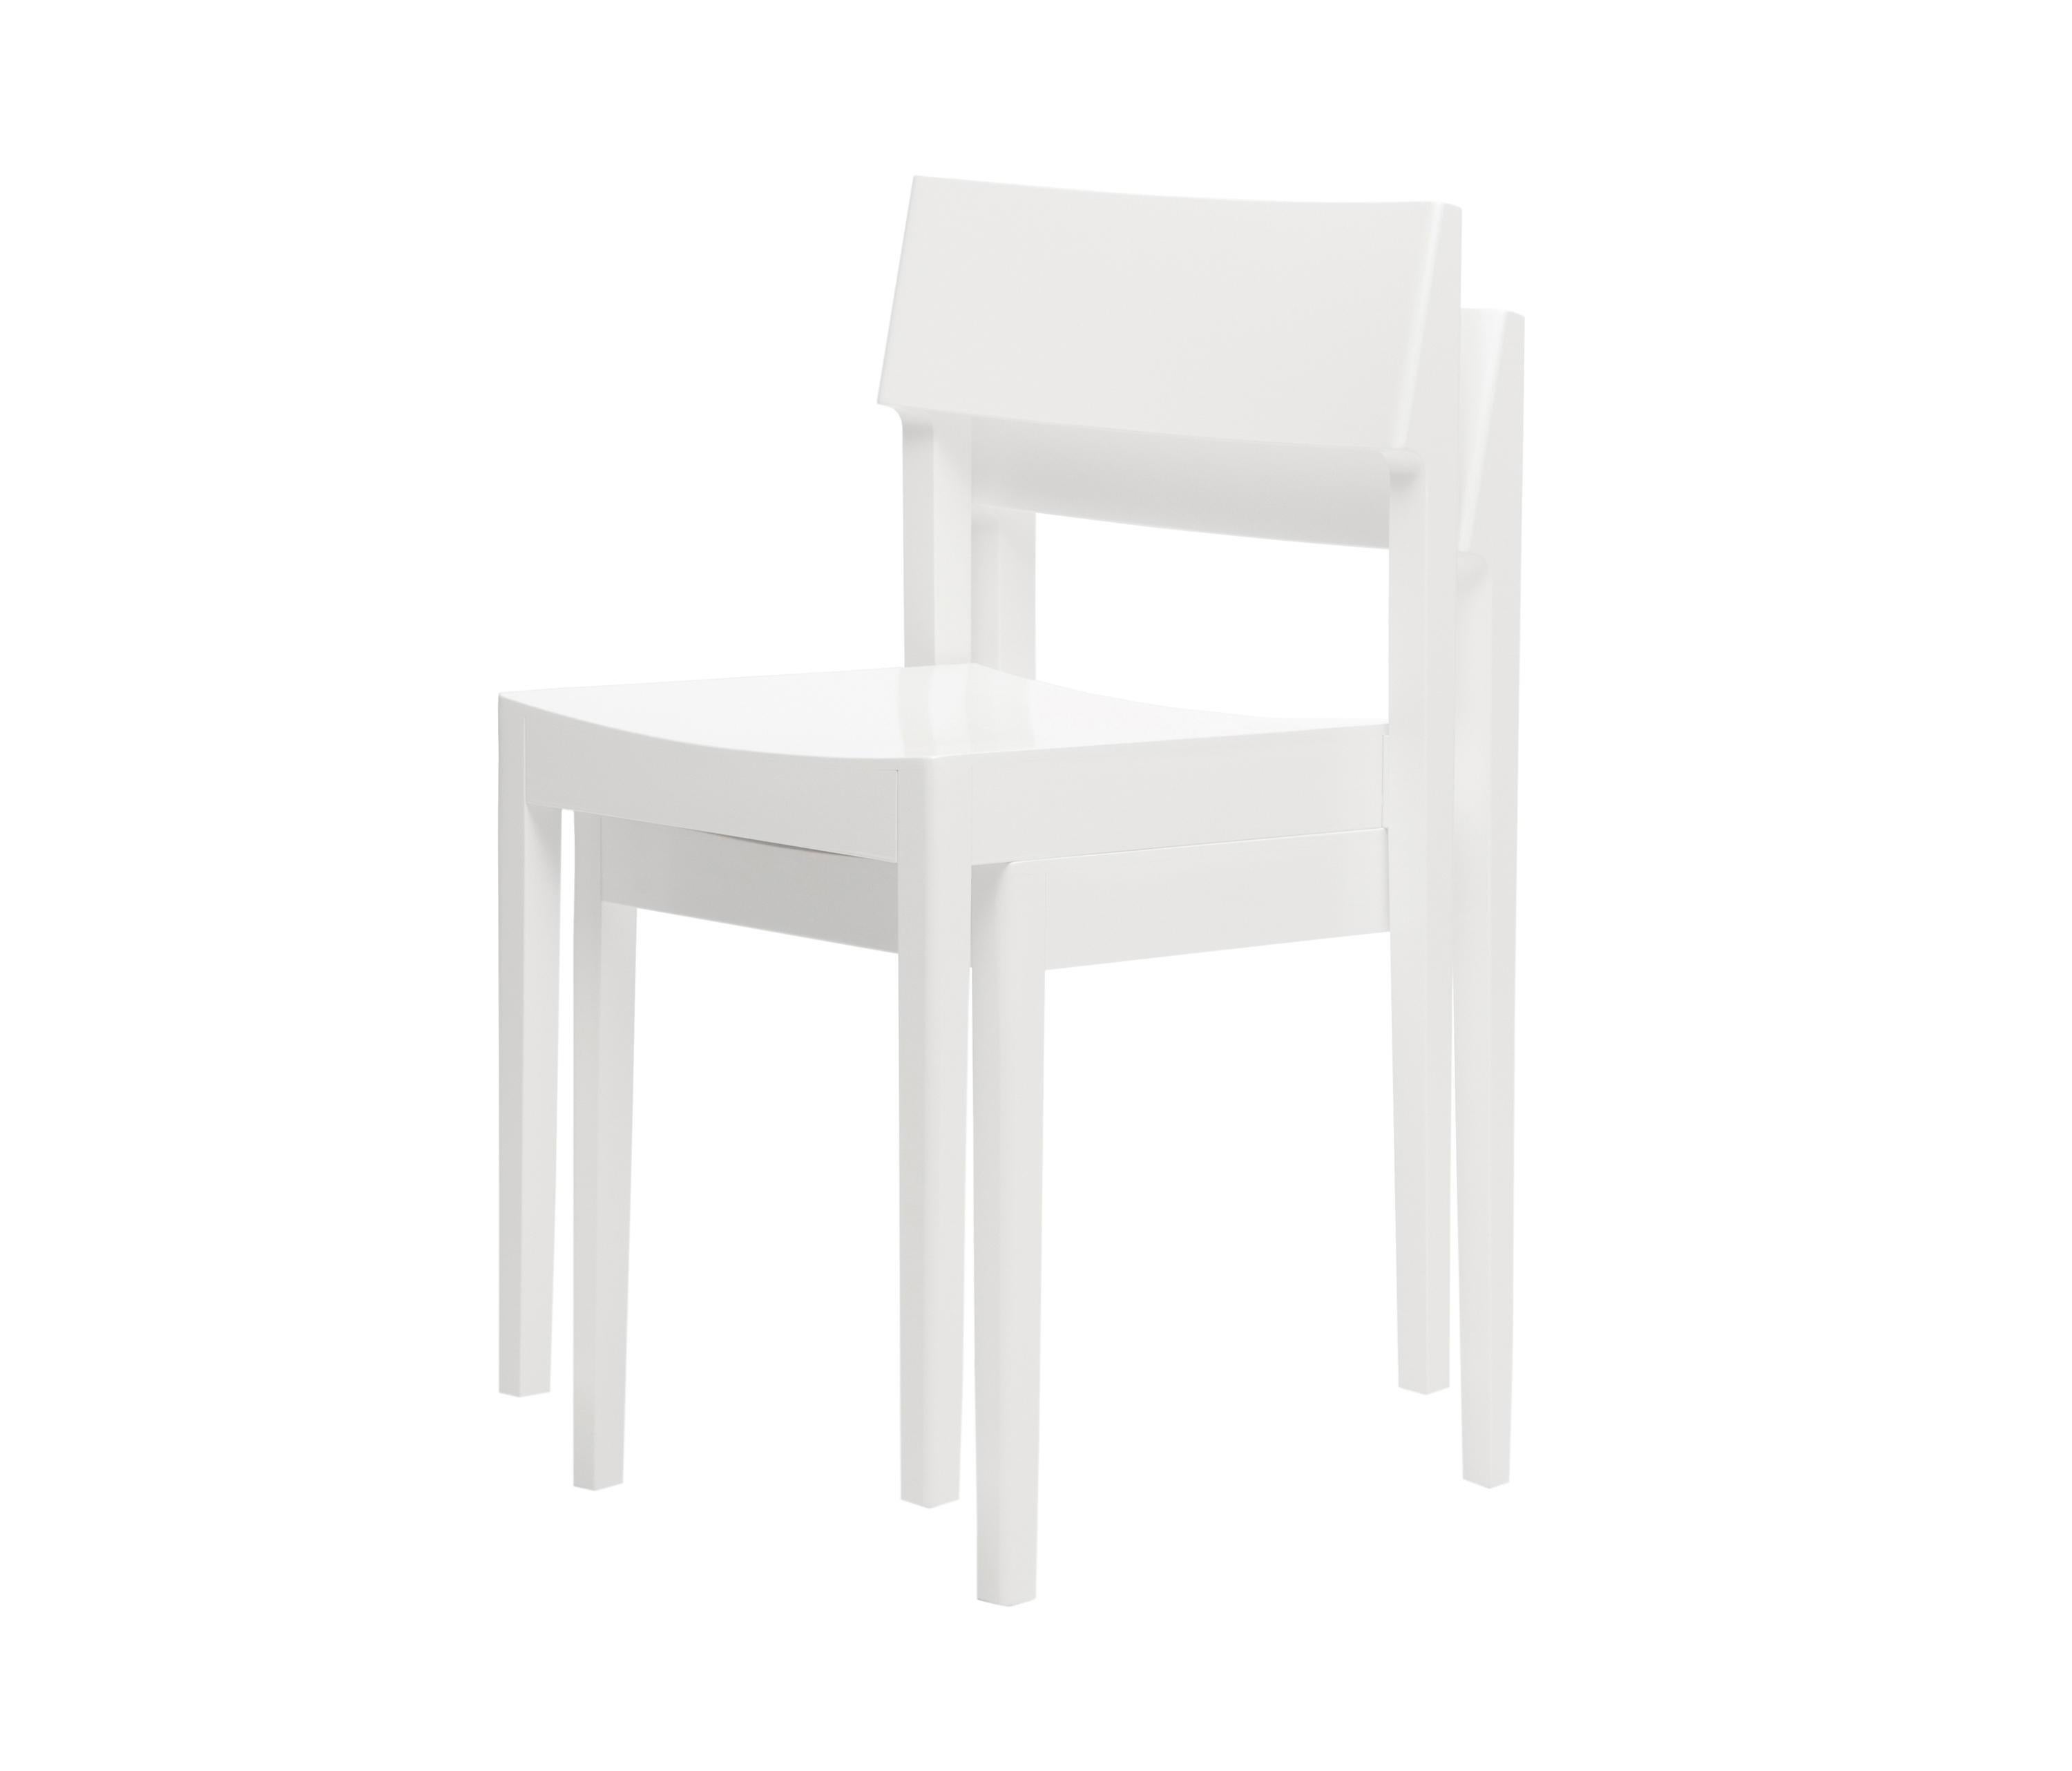 Contemporary Customizable Inno Intro Stackable Wood Chair by Ari Kanerva For Sale